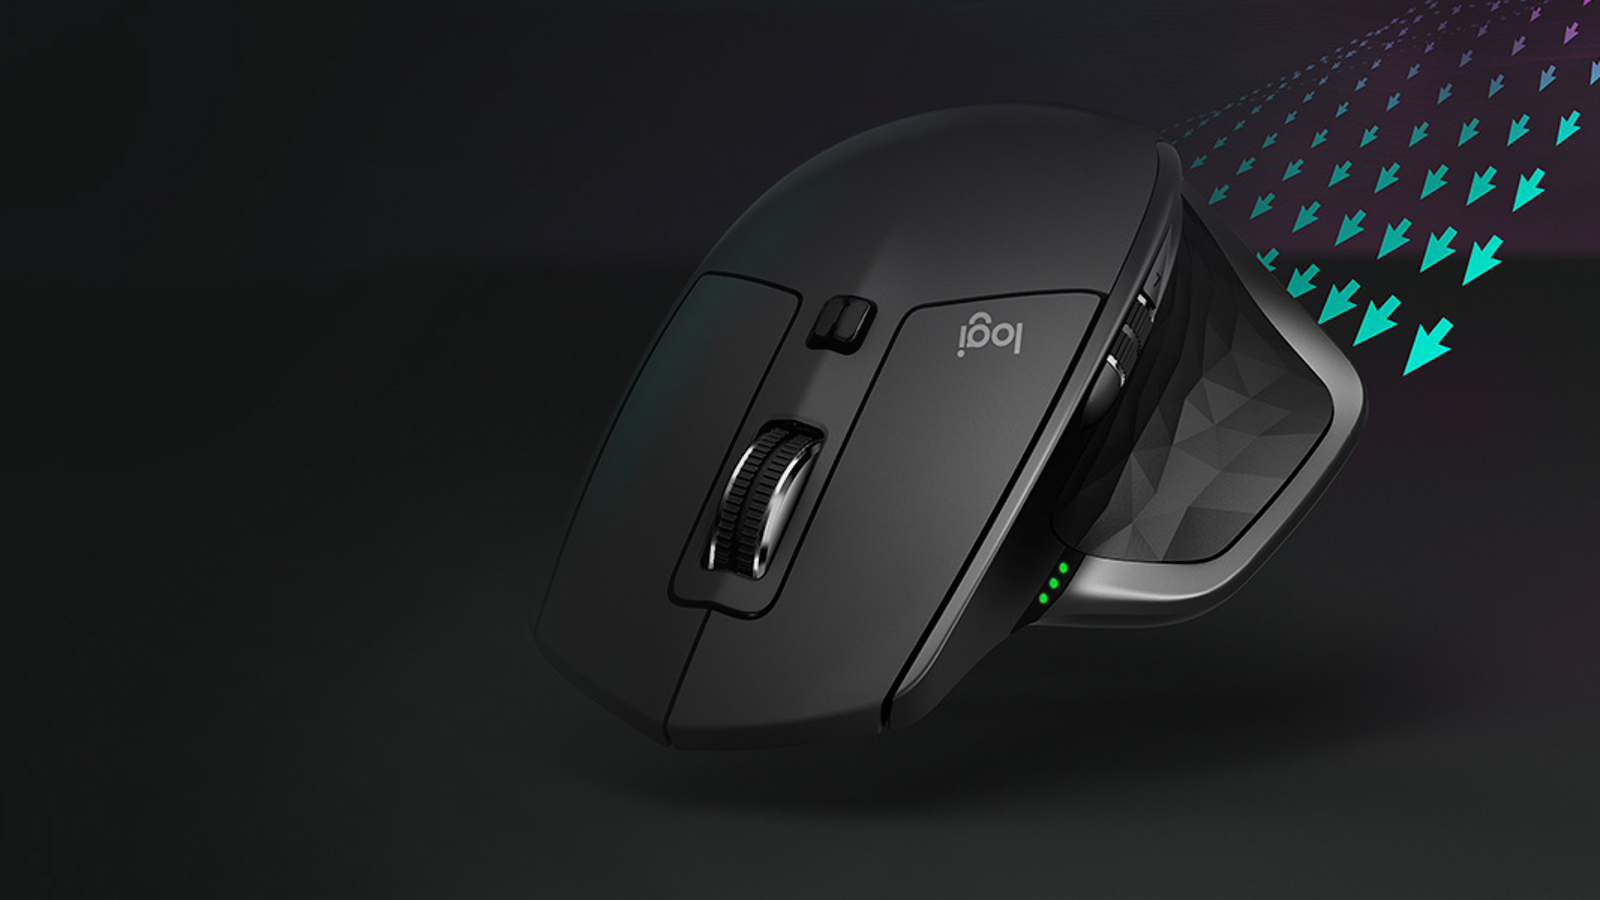 Bygger Surichinmoi Kvæle Grab Logitech's MX Master 2S wireless mouse for blissful gaming and working  | Rock Paper Shotgun